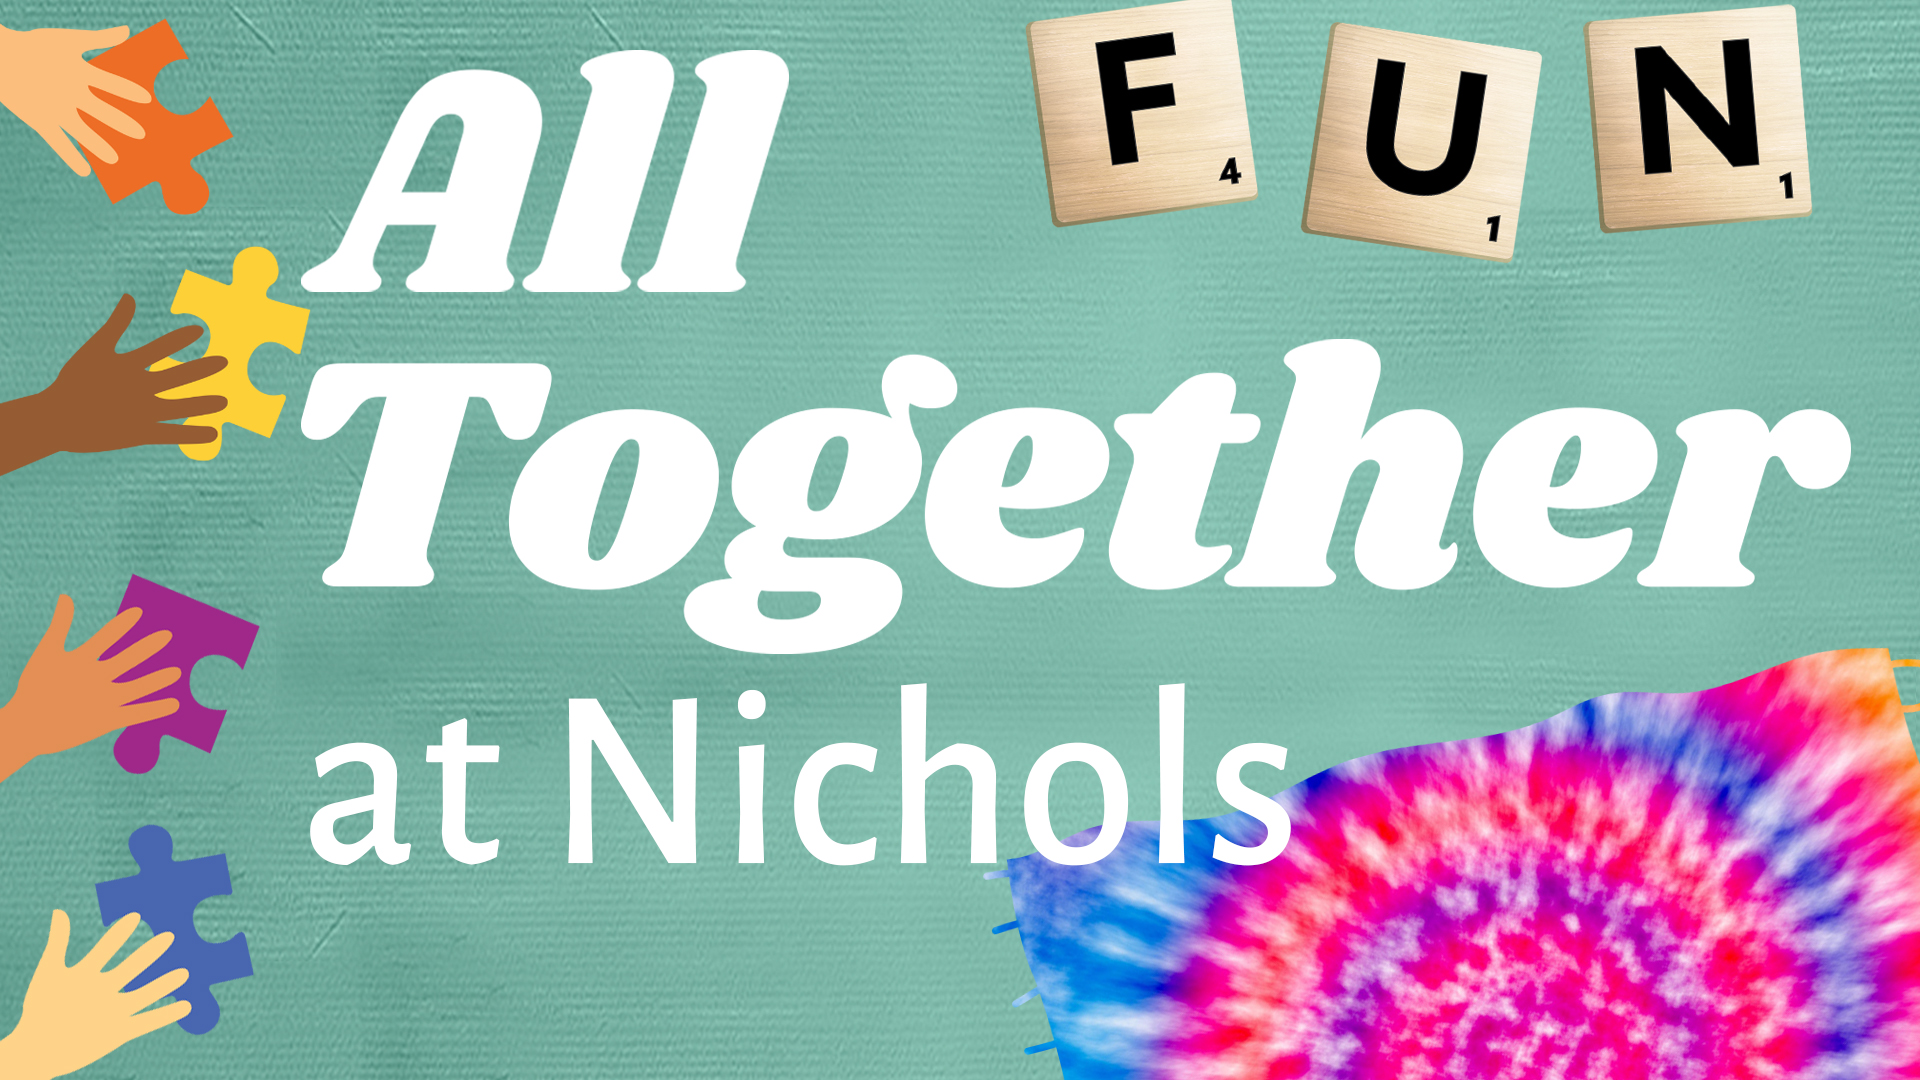 Image reads "All Together at Nichols" against a textured background. To the left of the title are hands holding puzzle pieces. To the bottom right of the title is a tie-dye towel. Above the title are scrabble letters spelling "FUN".